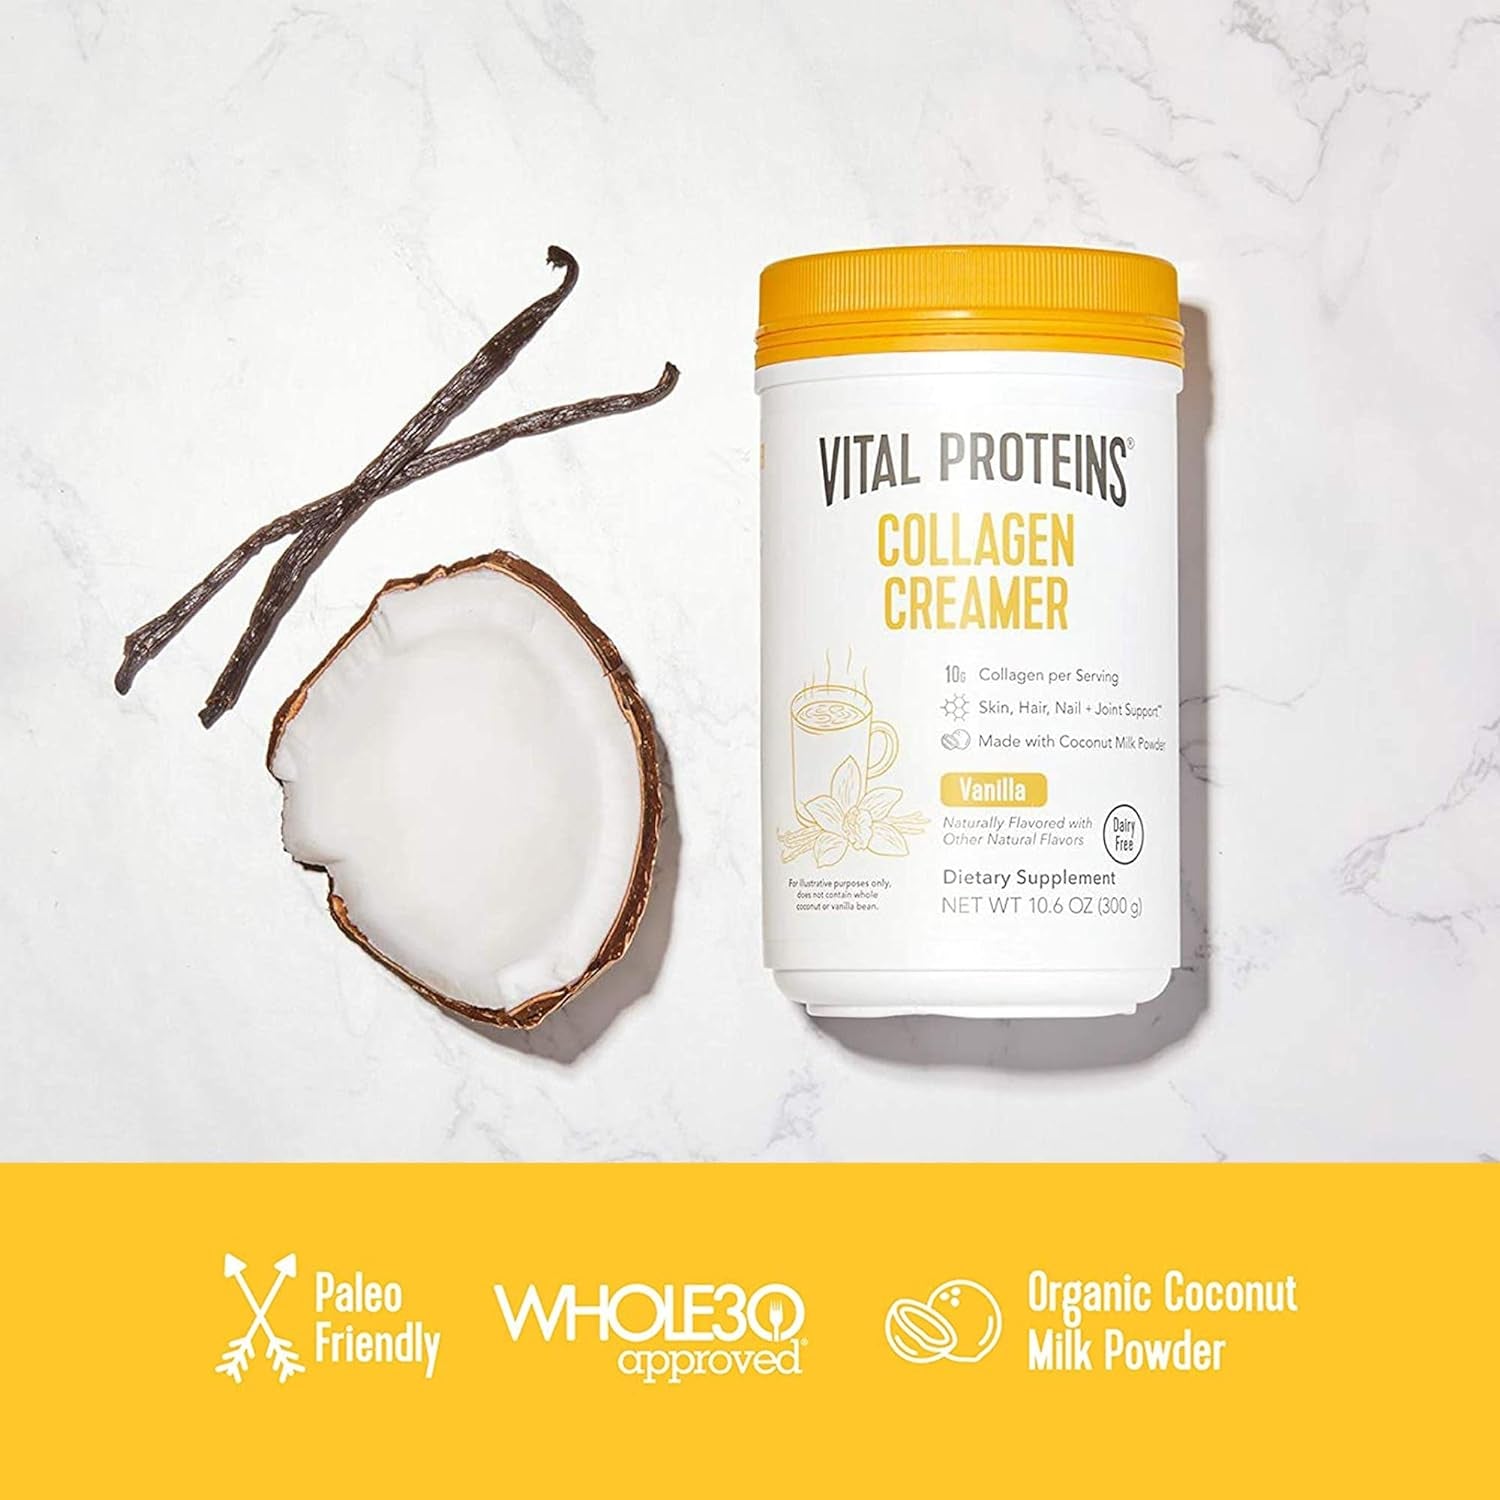 "Vital Proteins Vanilla Collagen Coffee Creamer for Healthy Hair, Skin, and Nails - Energy-Boosting MCTs Included!"